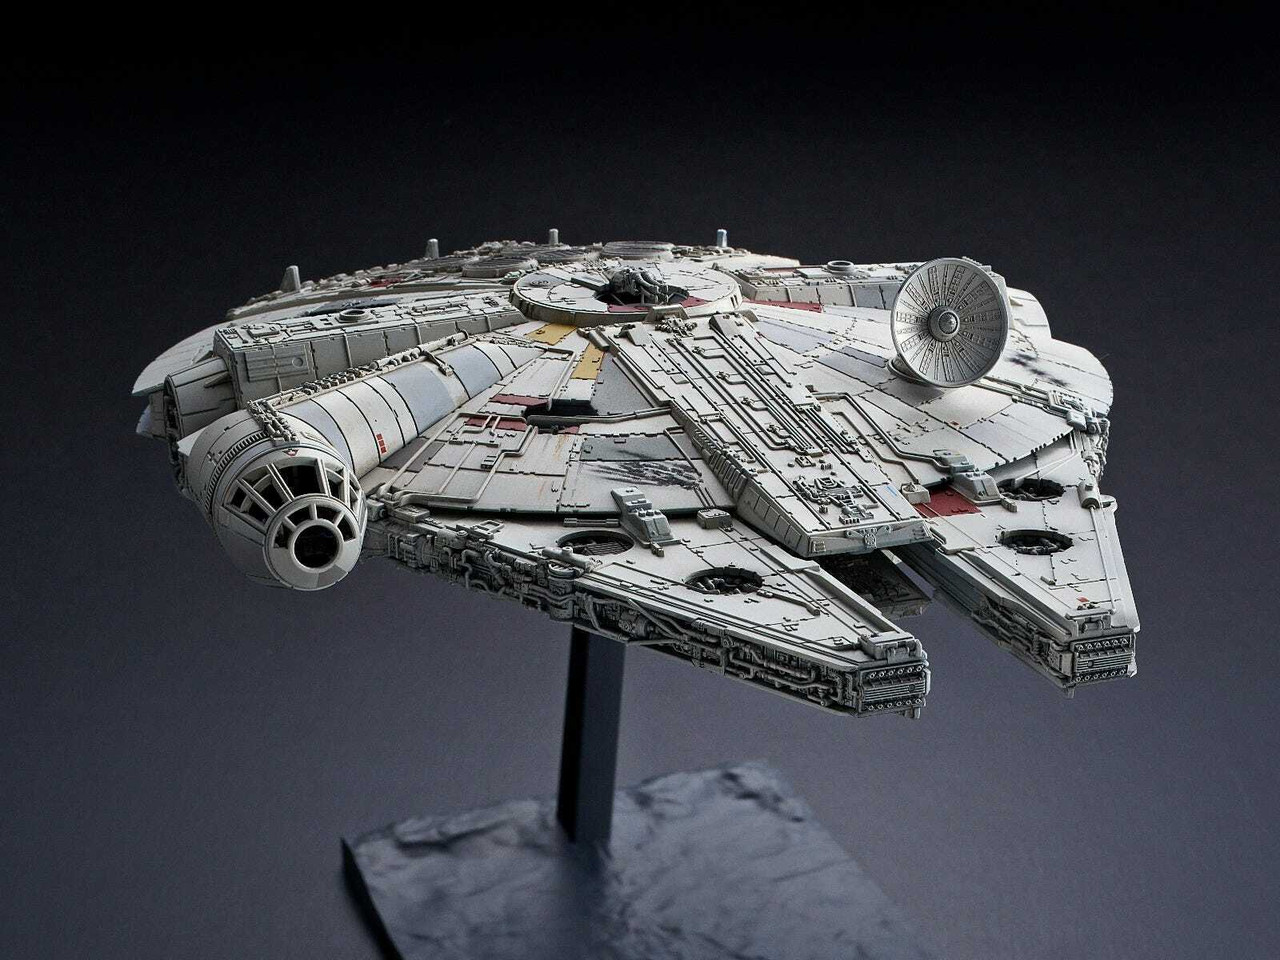 Star Wars The Rise of Skywalker Millennium Falcon 1/144 by Bandai Model Kit USA 